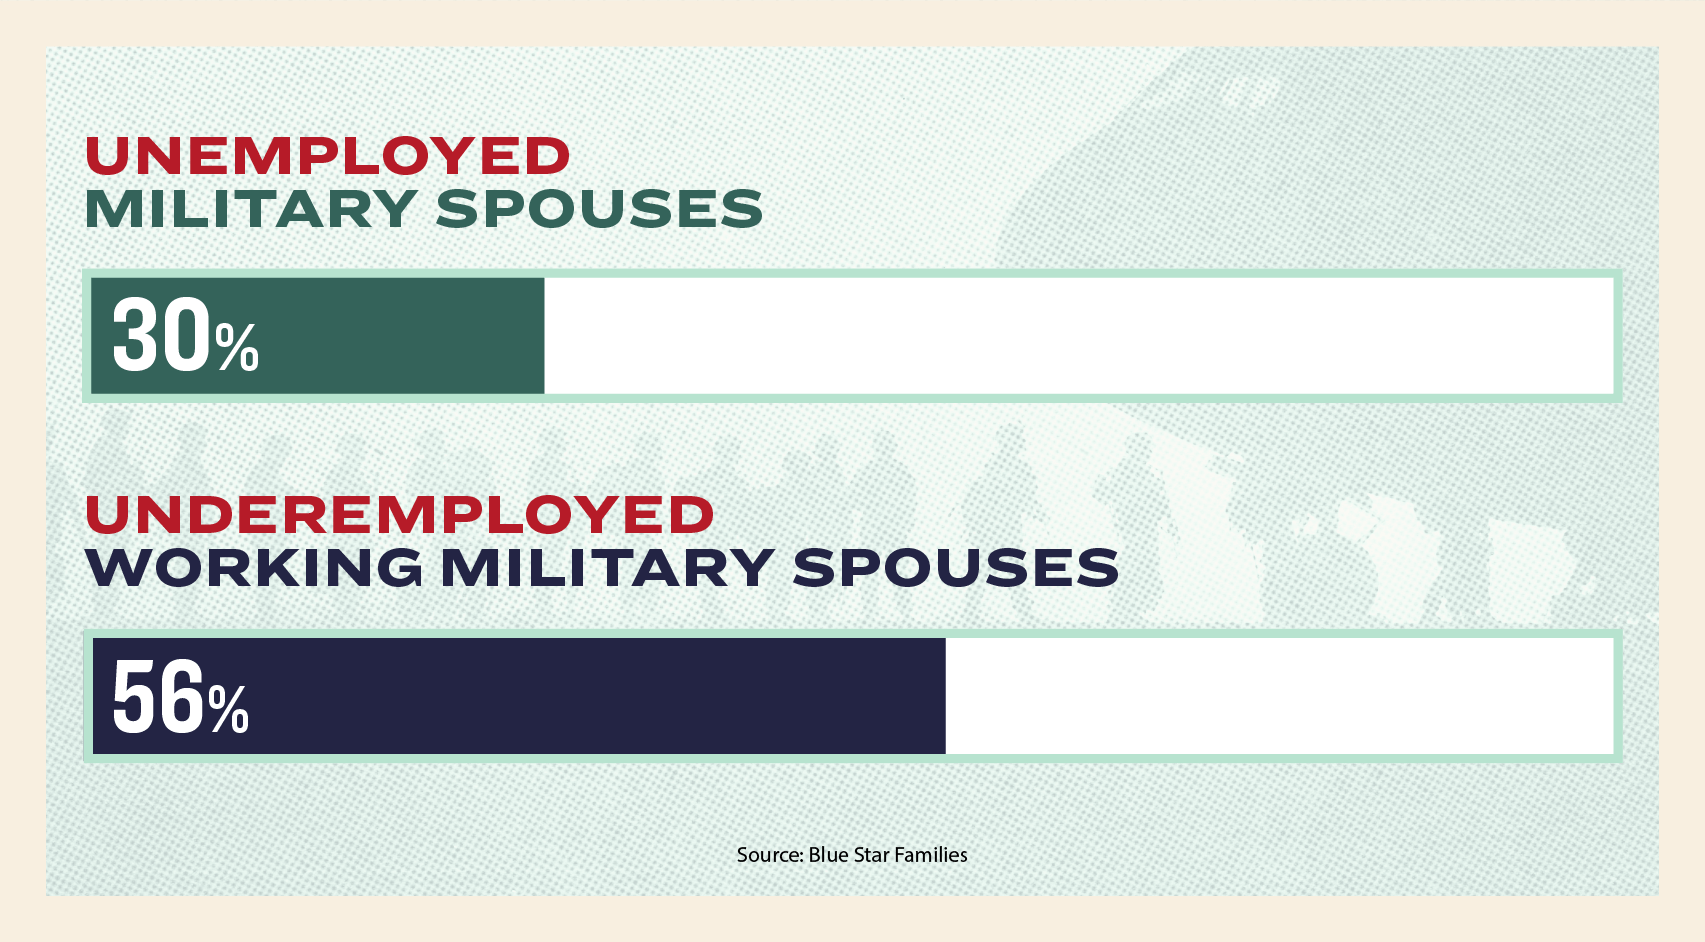 Bar graph that shows 30% of military spouses are unemployed and 56% of working military spouses are unemployed. 